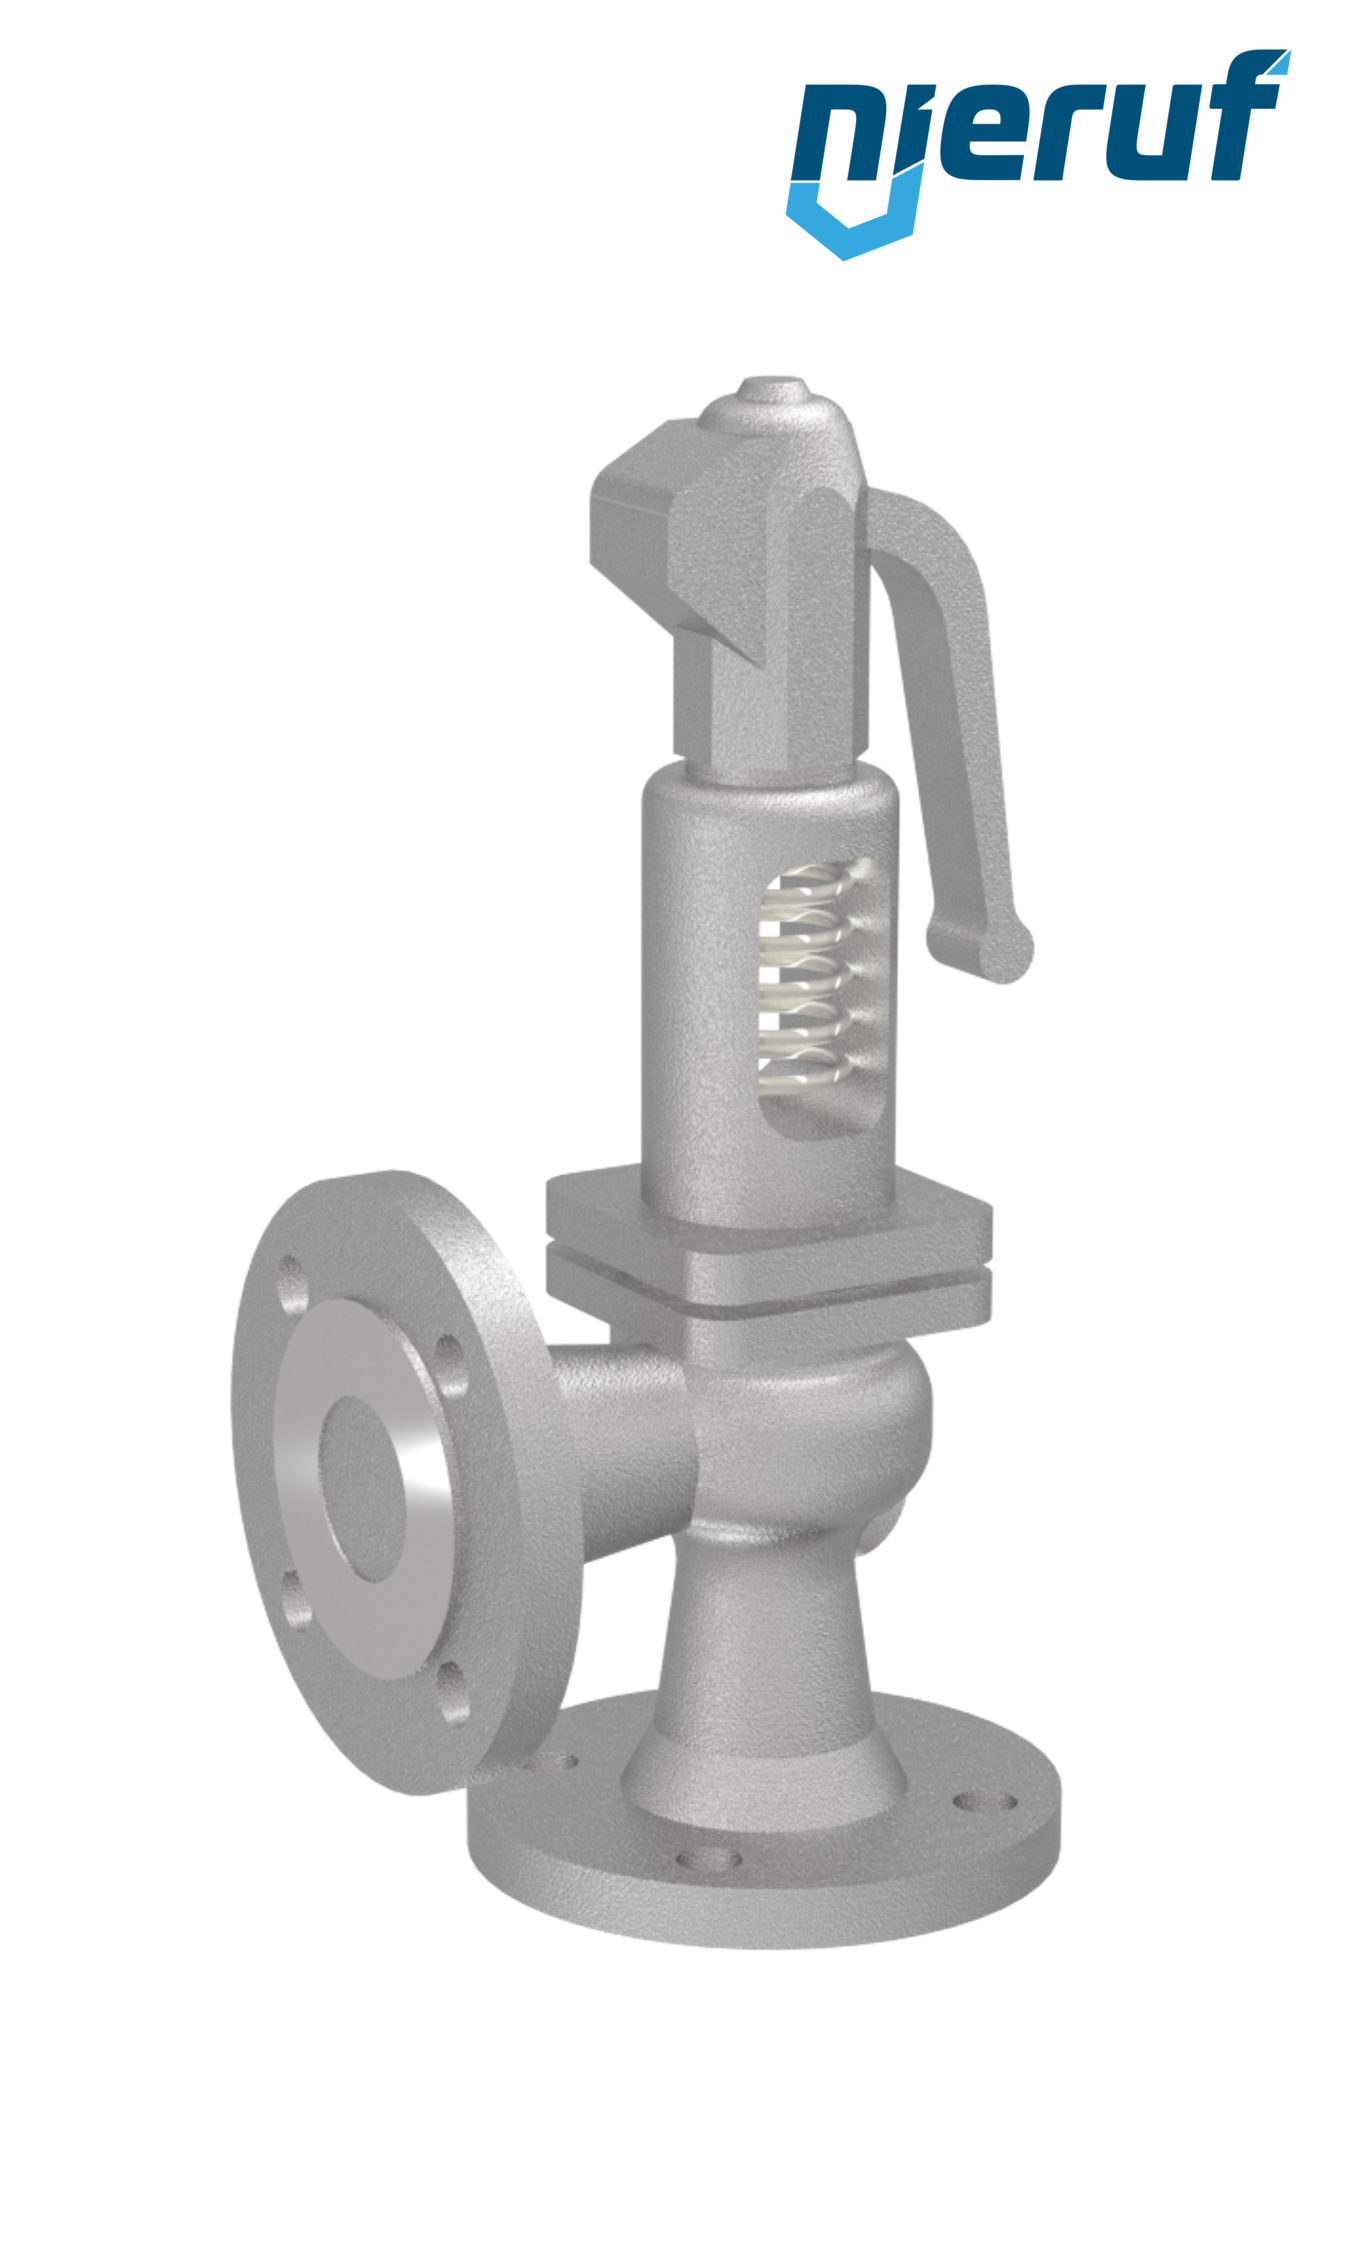 flange-safety valve DN50/DN50 SF0202, cast steel FPM, with lever